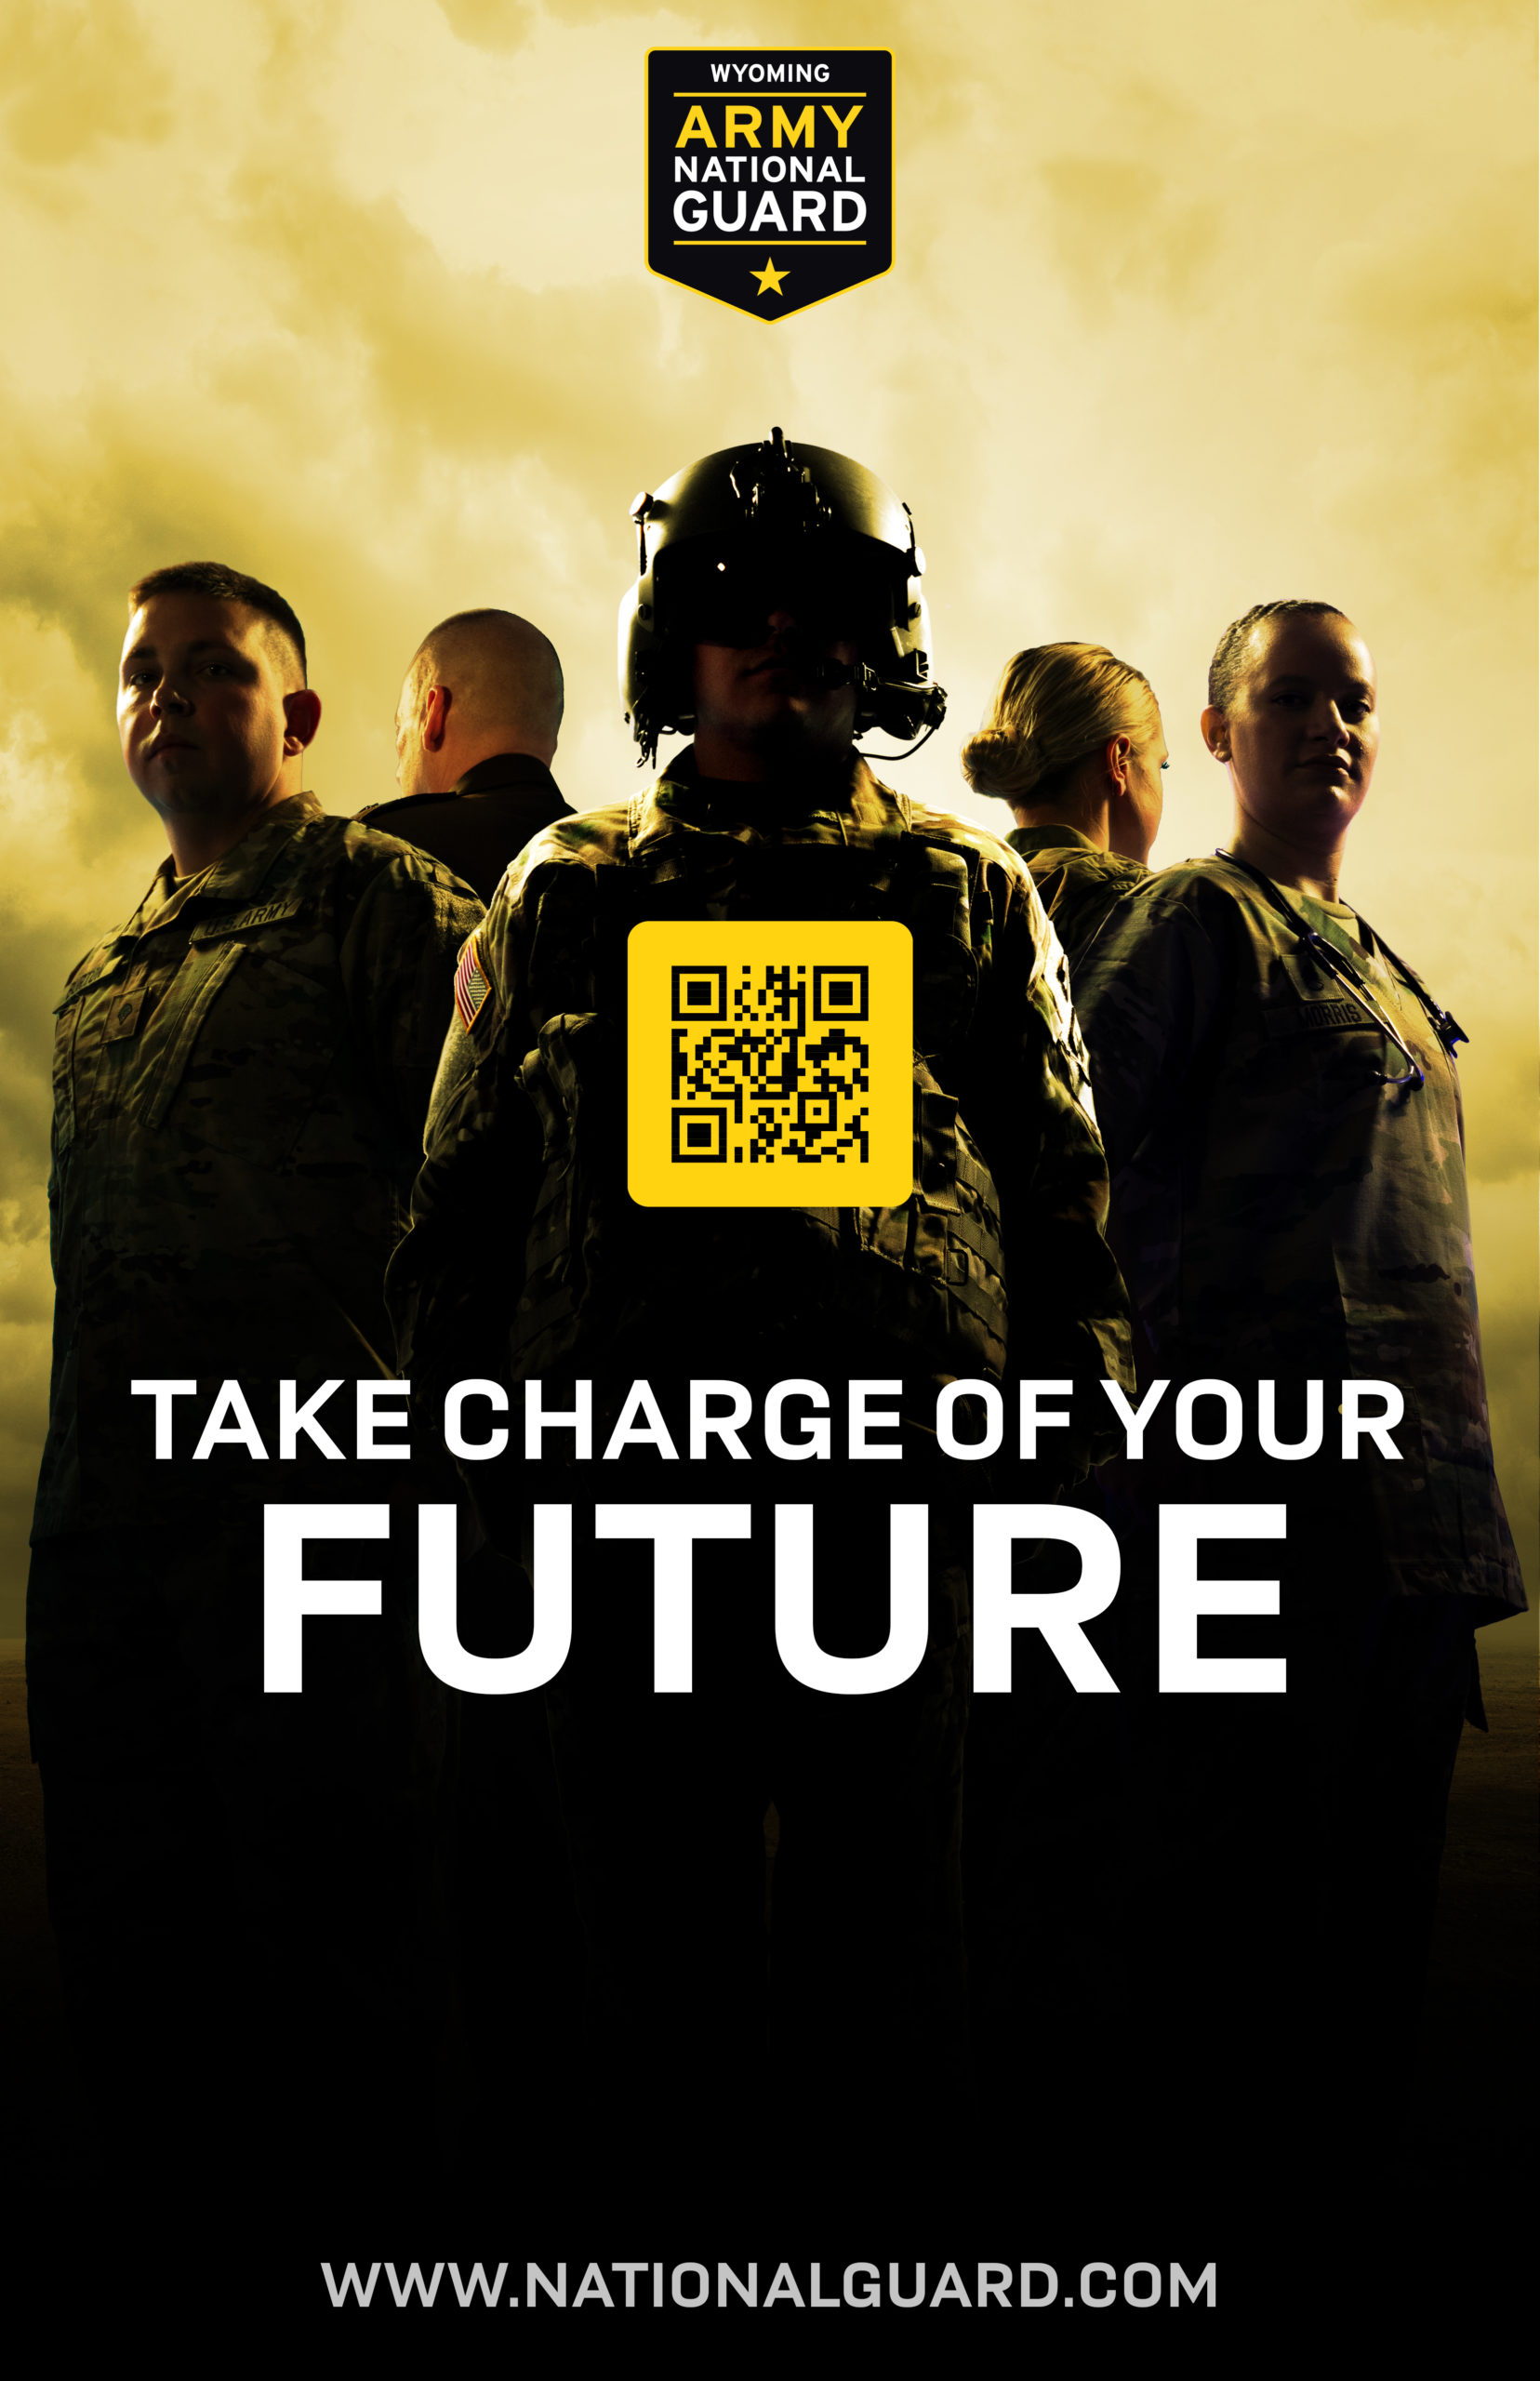 Poster with people dressed in National Guard Uniforms against a yellow background. The text reads "Take charge of your future"